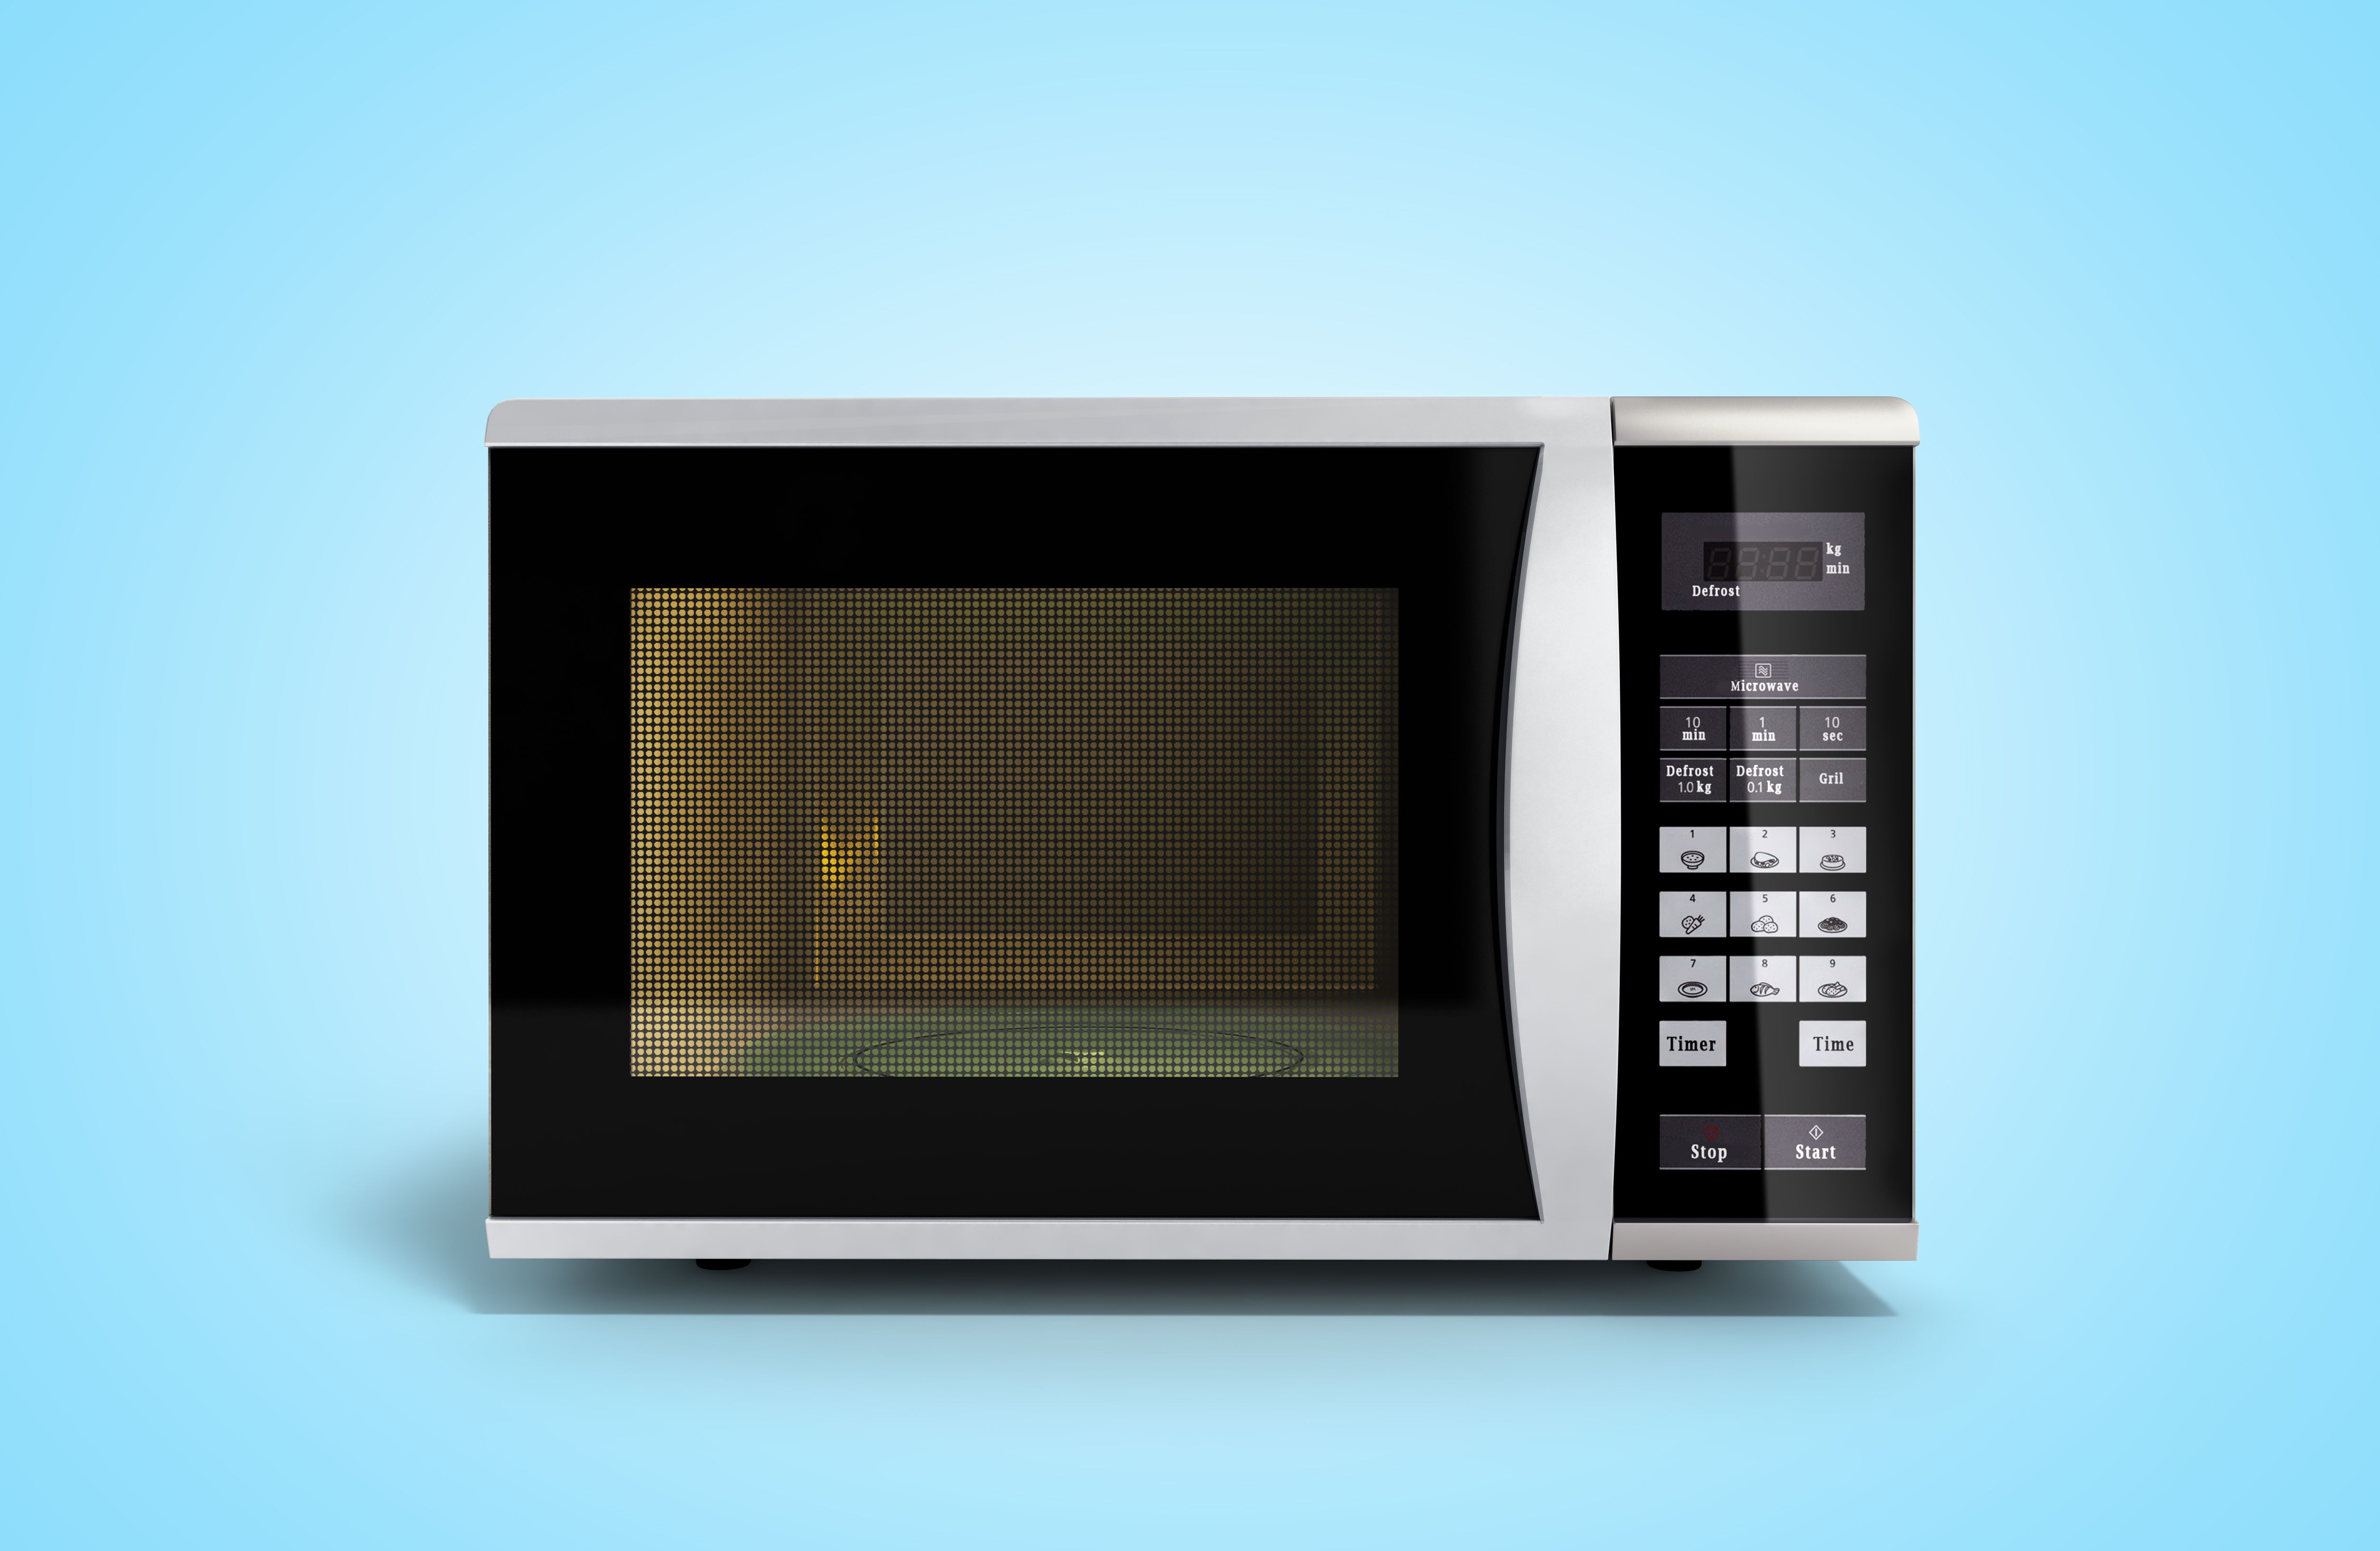 Microwave To Oven Conversion Chart